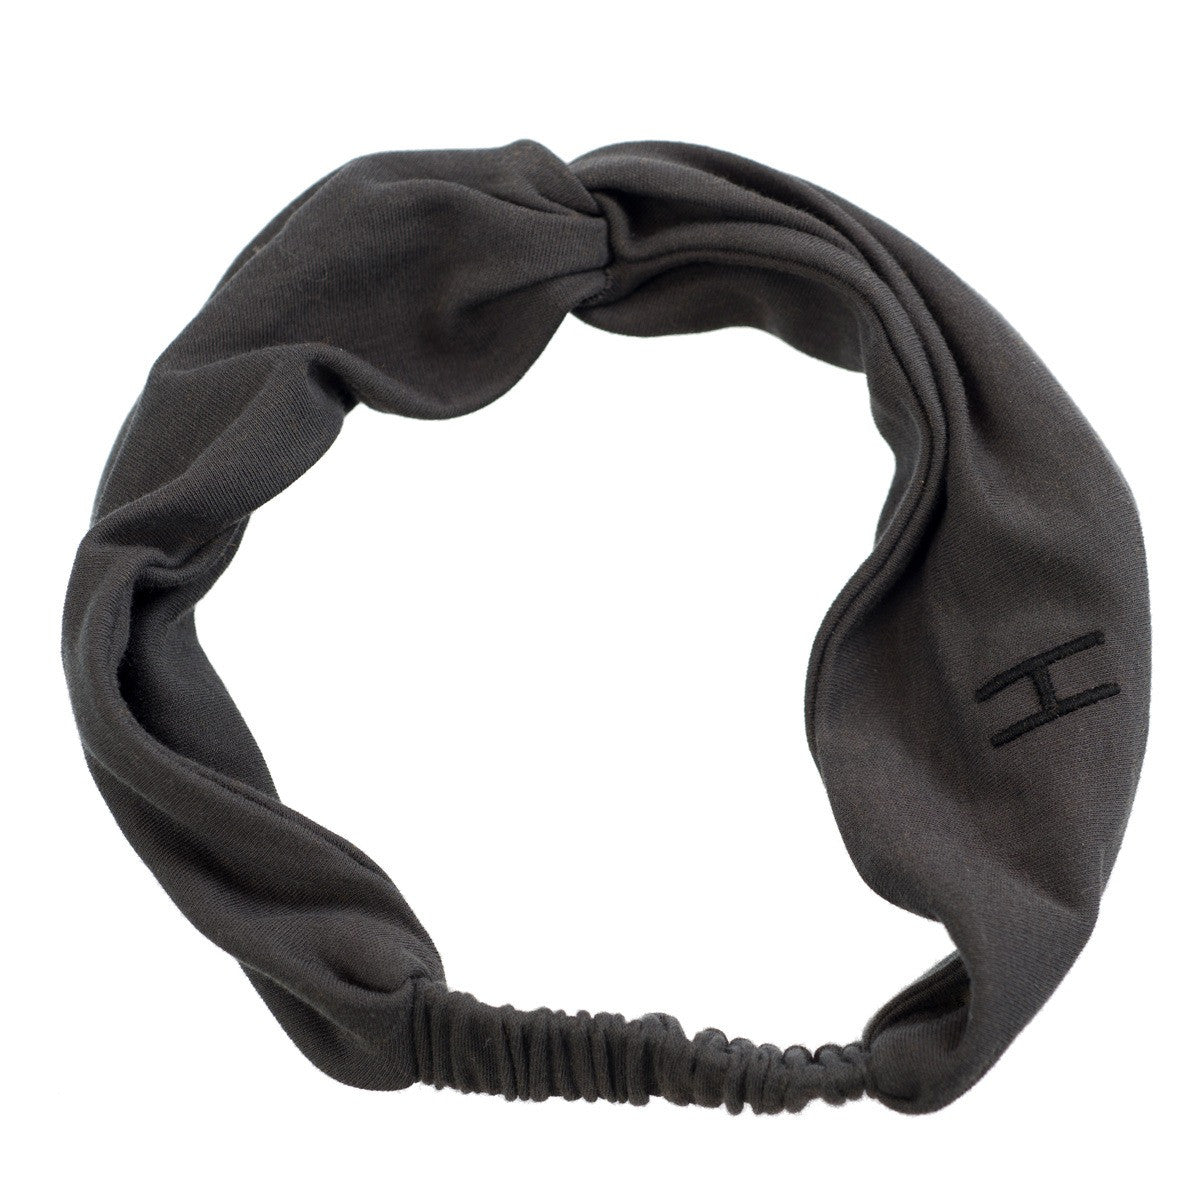 Little Hedonist one-size-fits-all head band, made of organic cotton, in Pirate Black